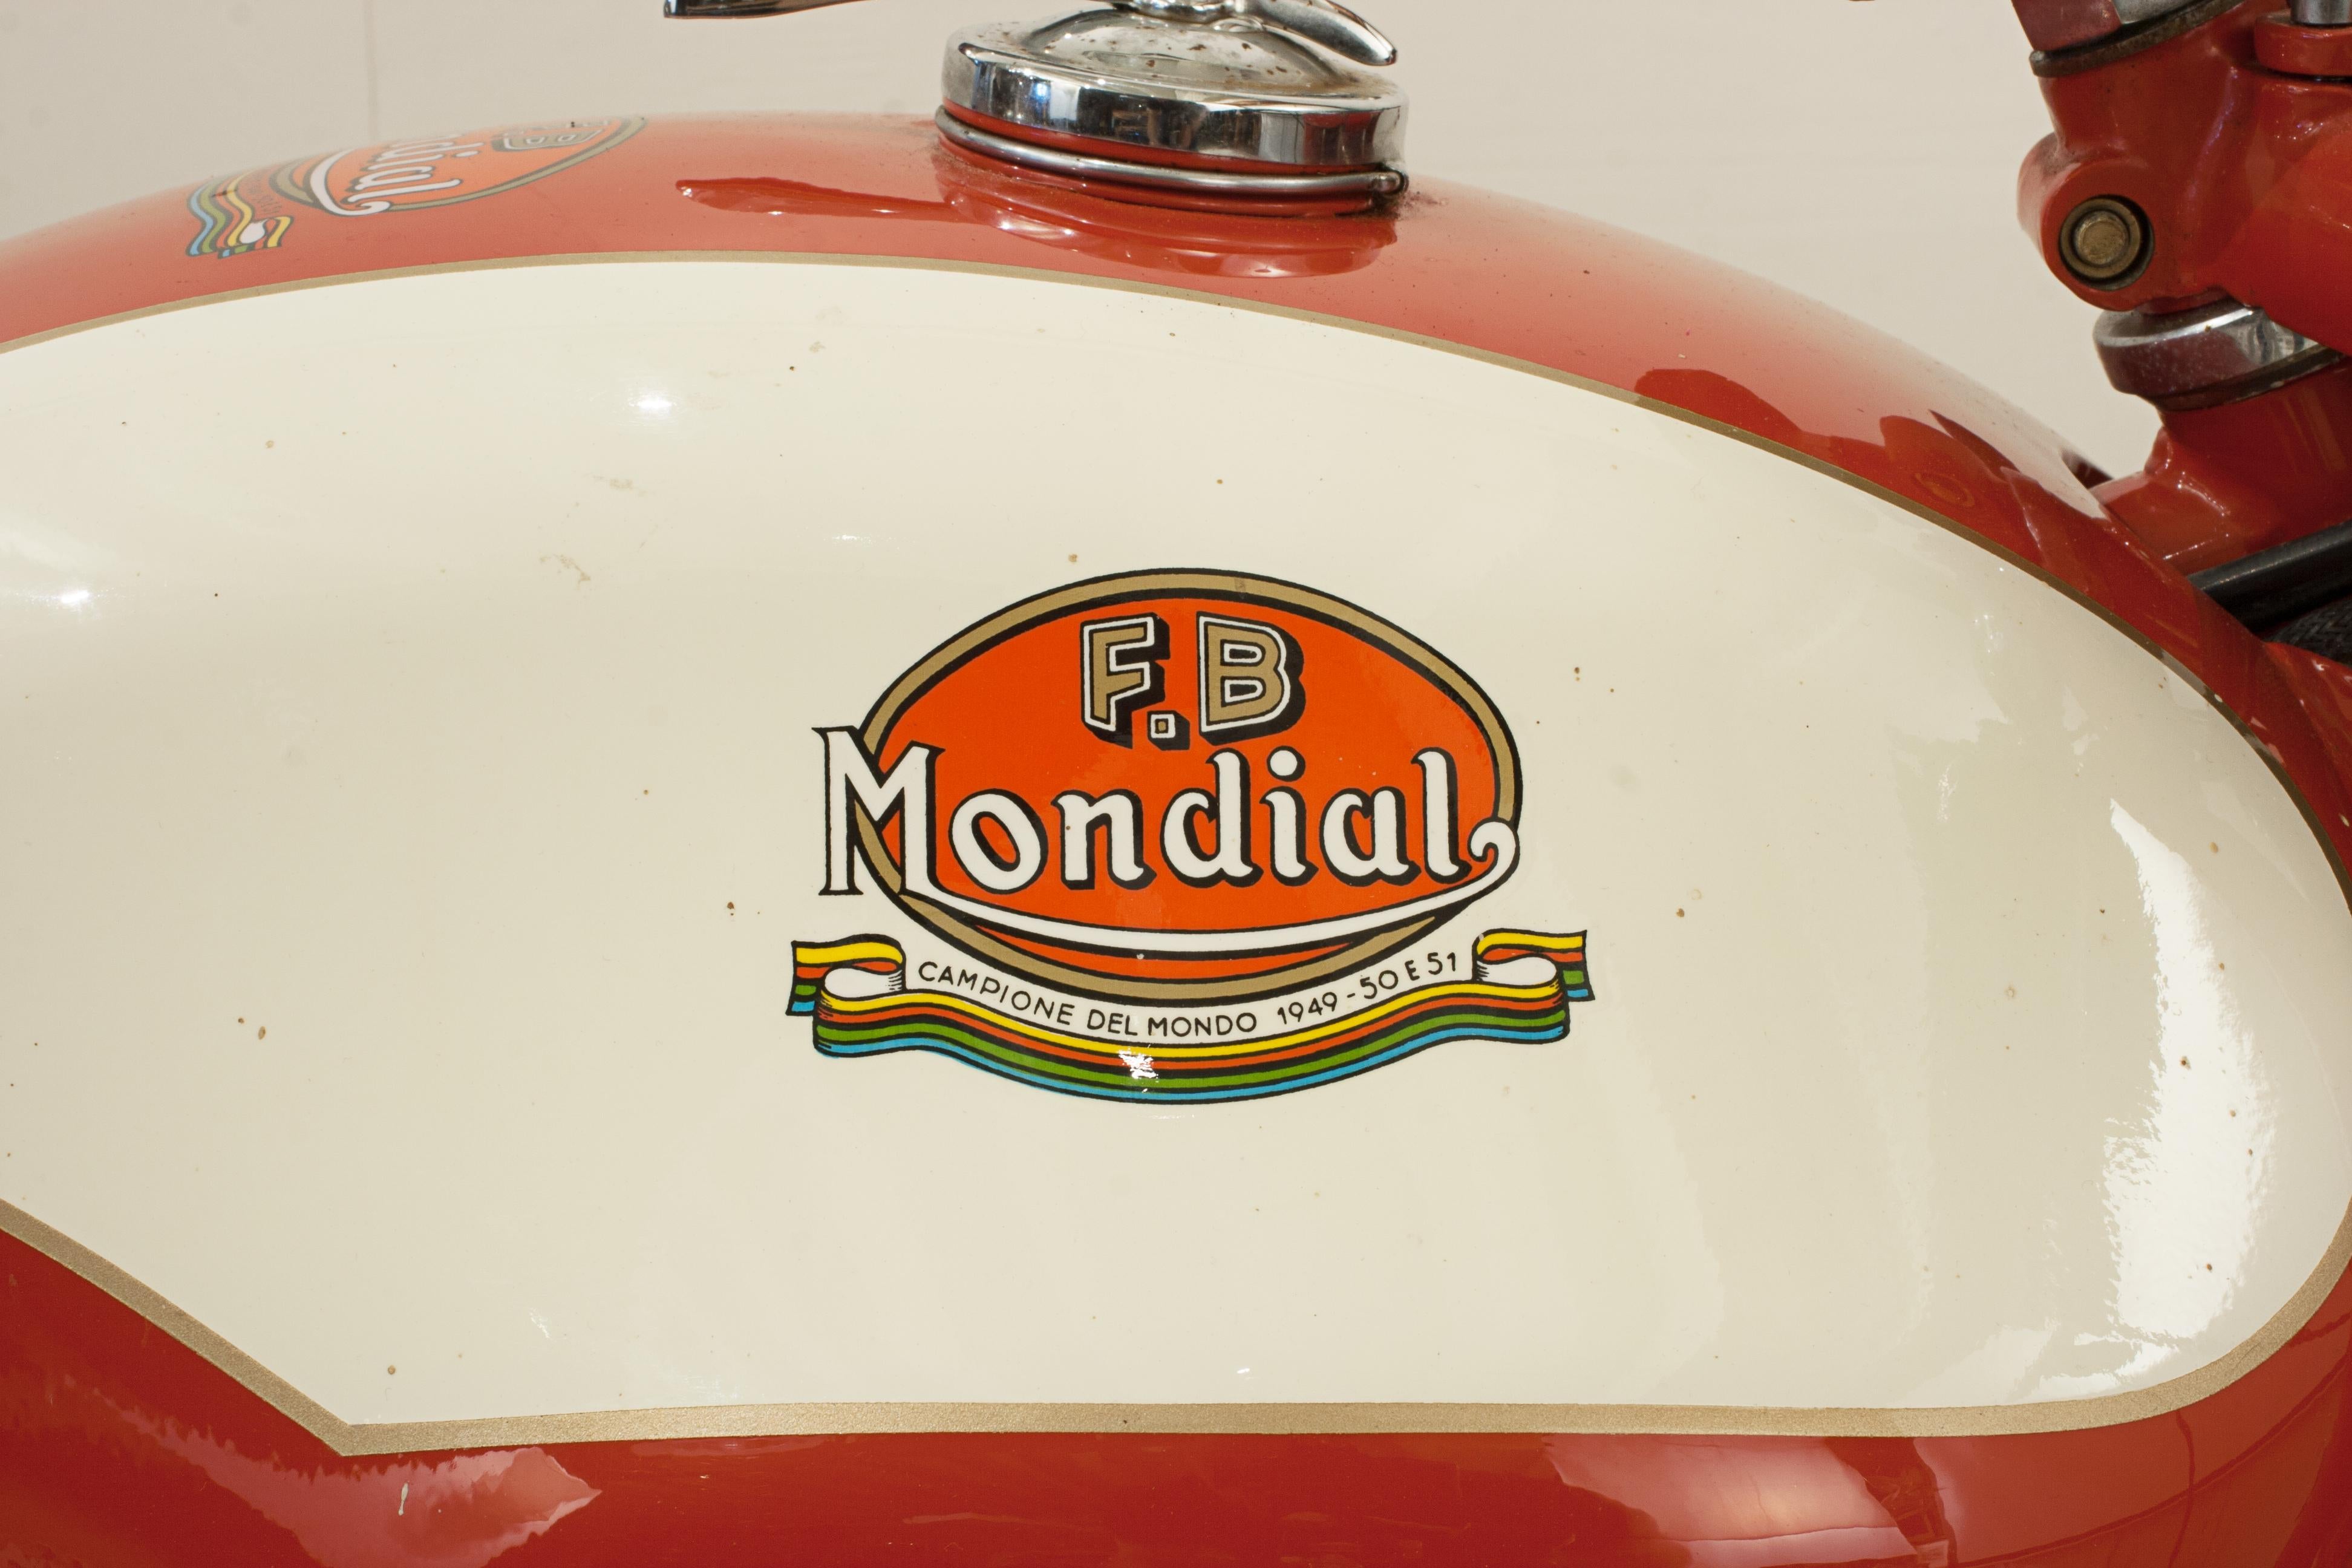 1960 motorcycle